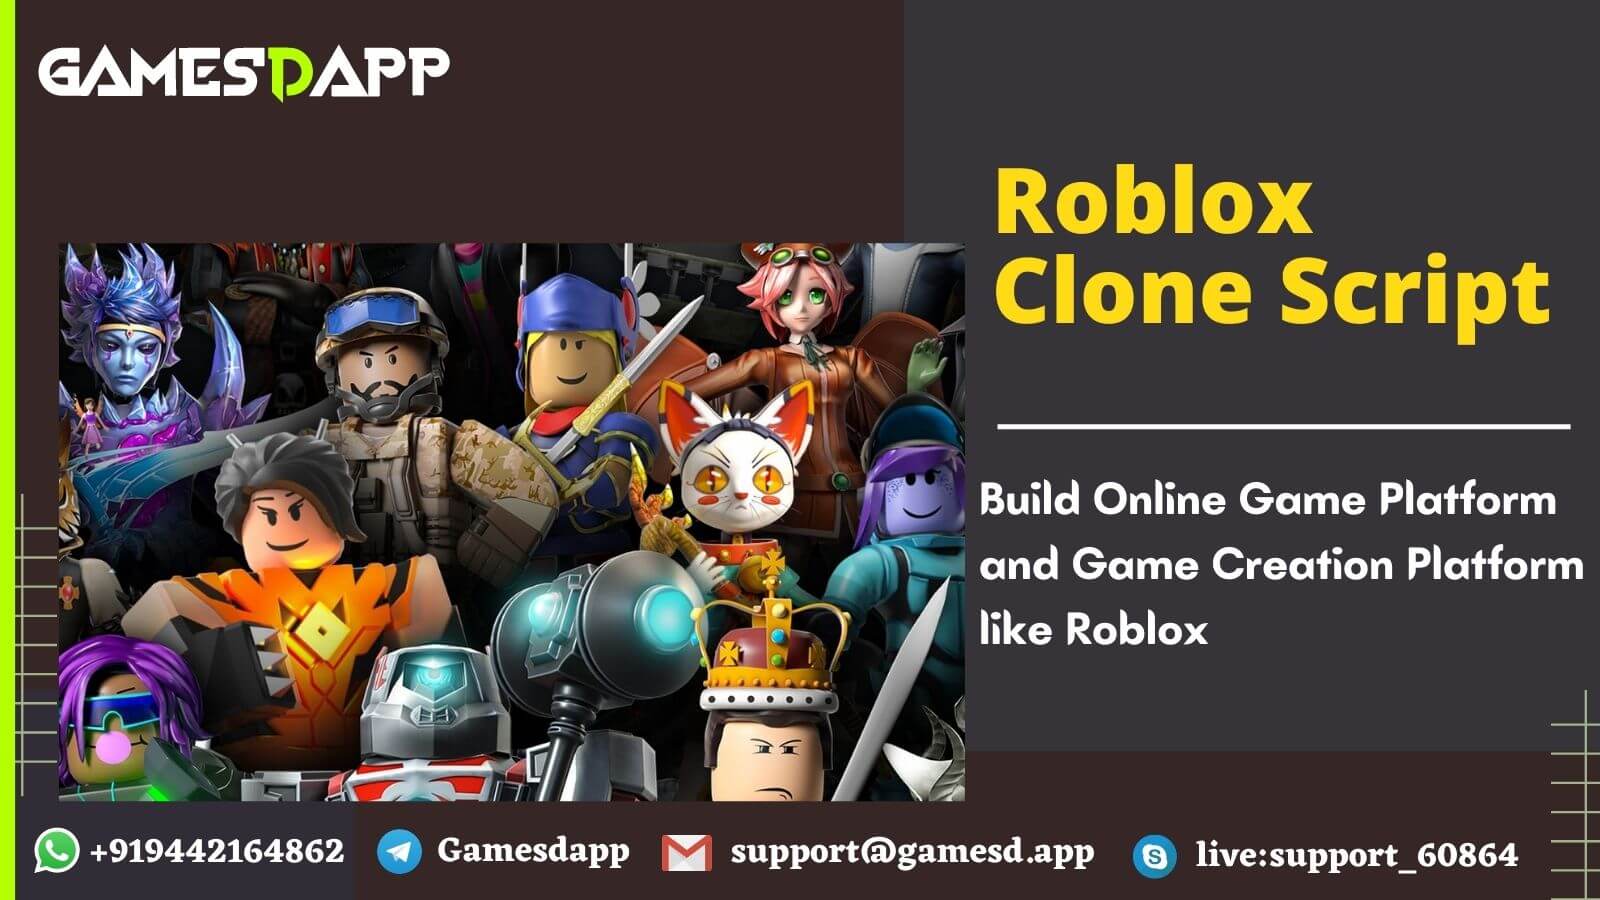 Roblox Game Clone - To Build Game Creation Platform Like Roblox